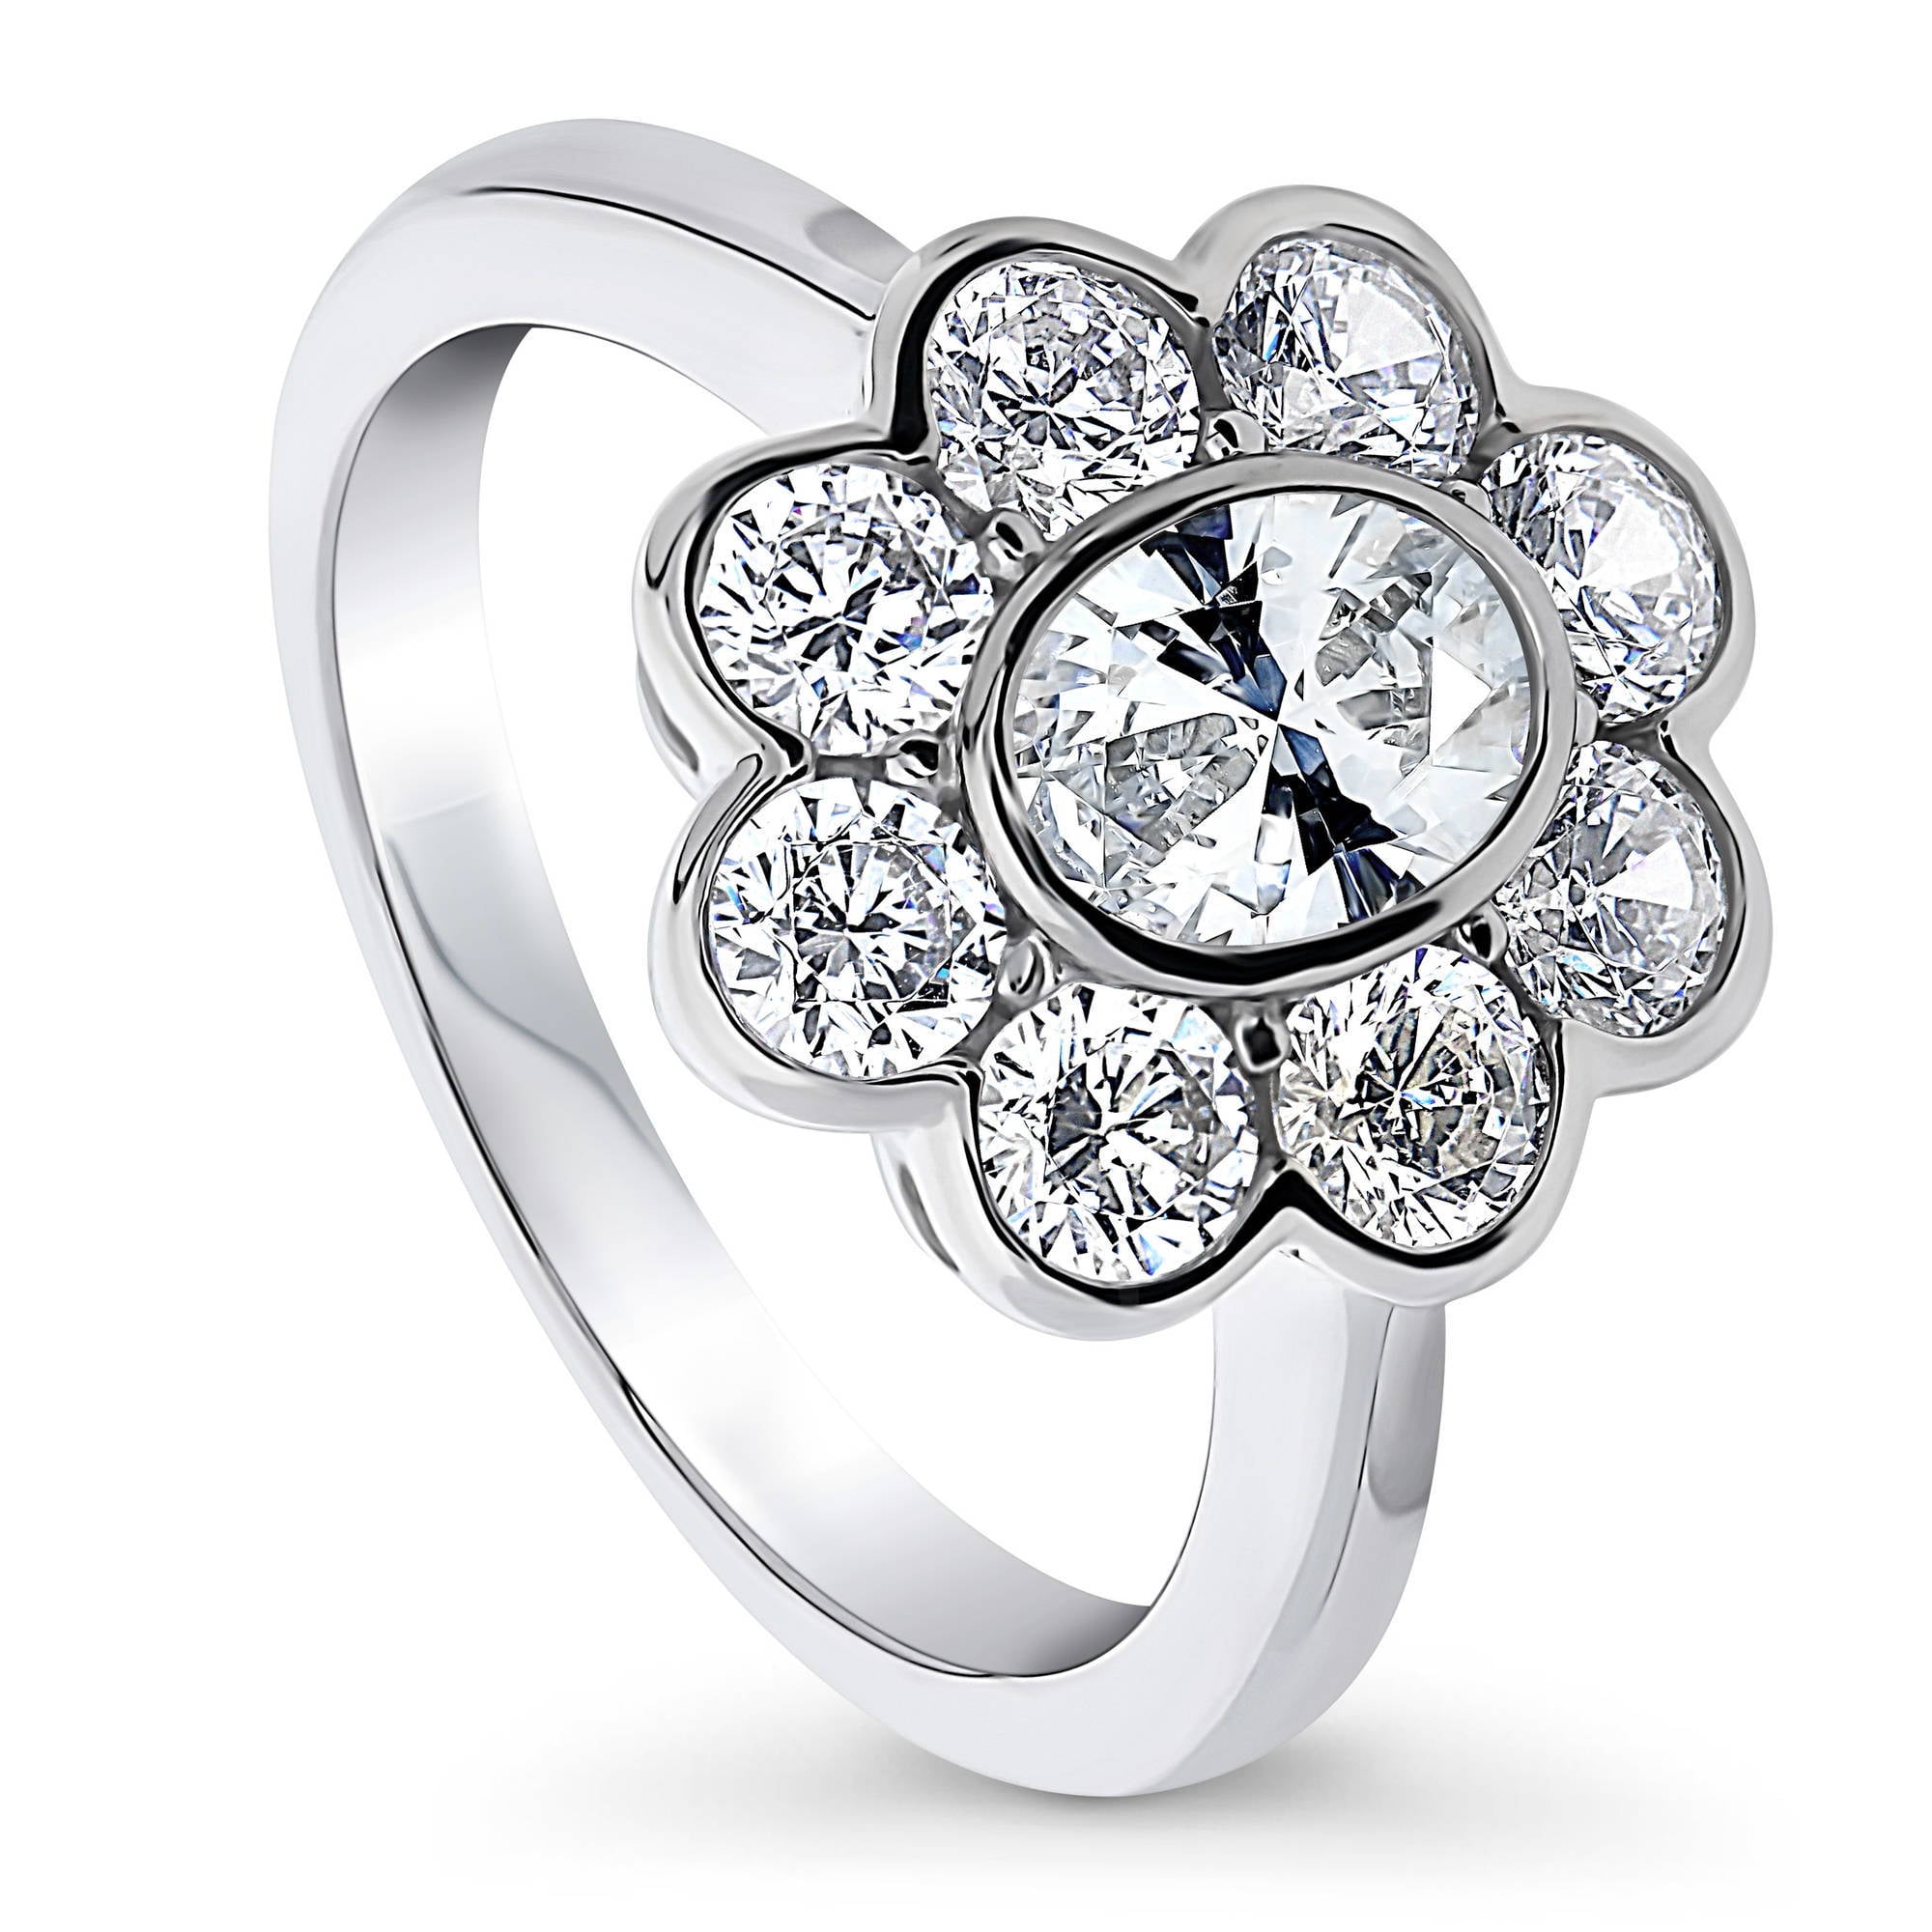 Clear Cubic Zirconia Halo Flower Design Ring Rhodium Plated Sterling Silver